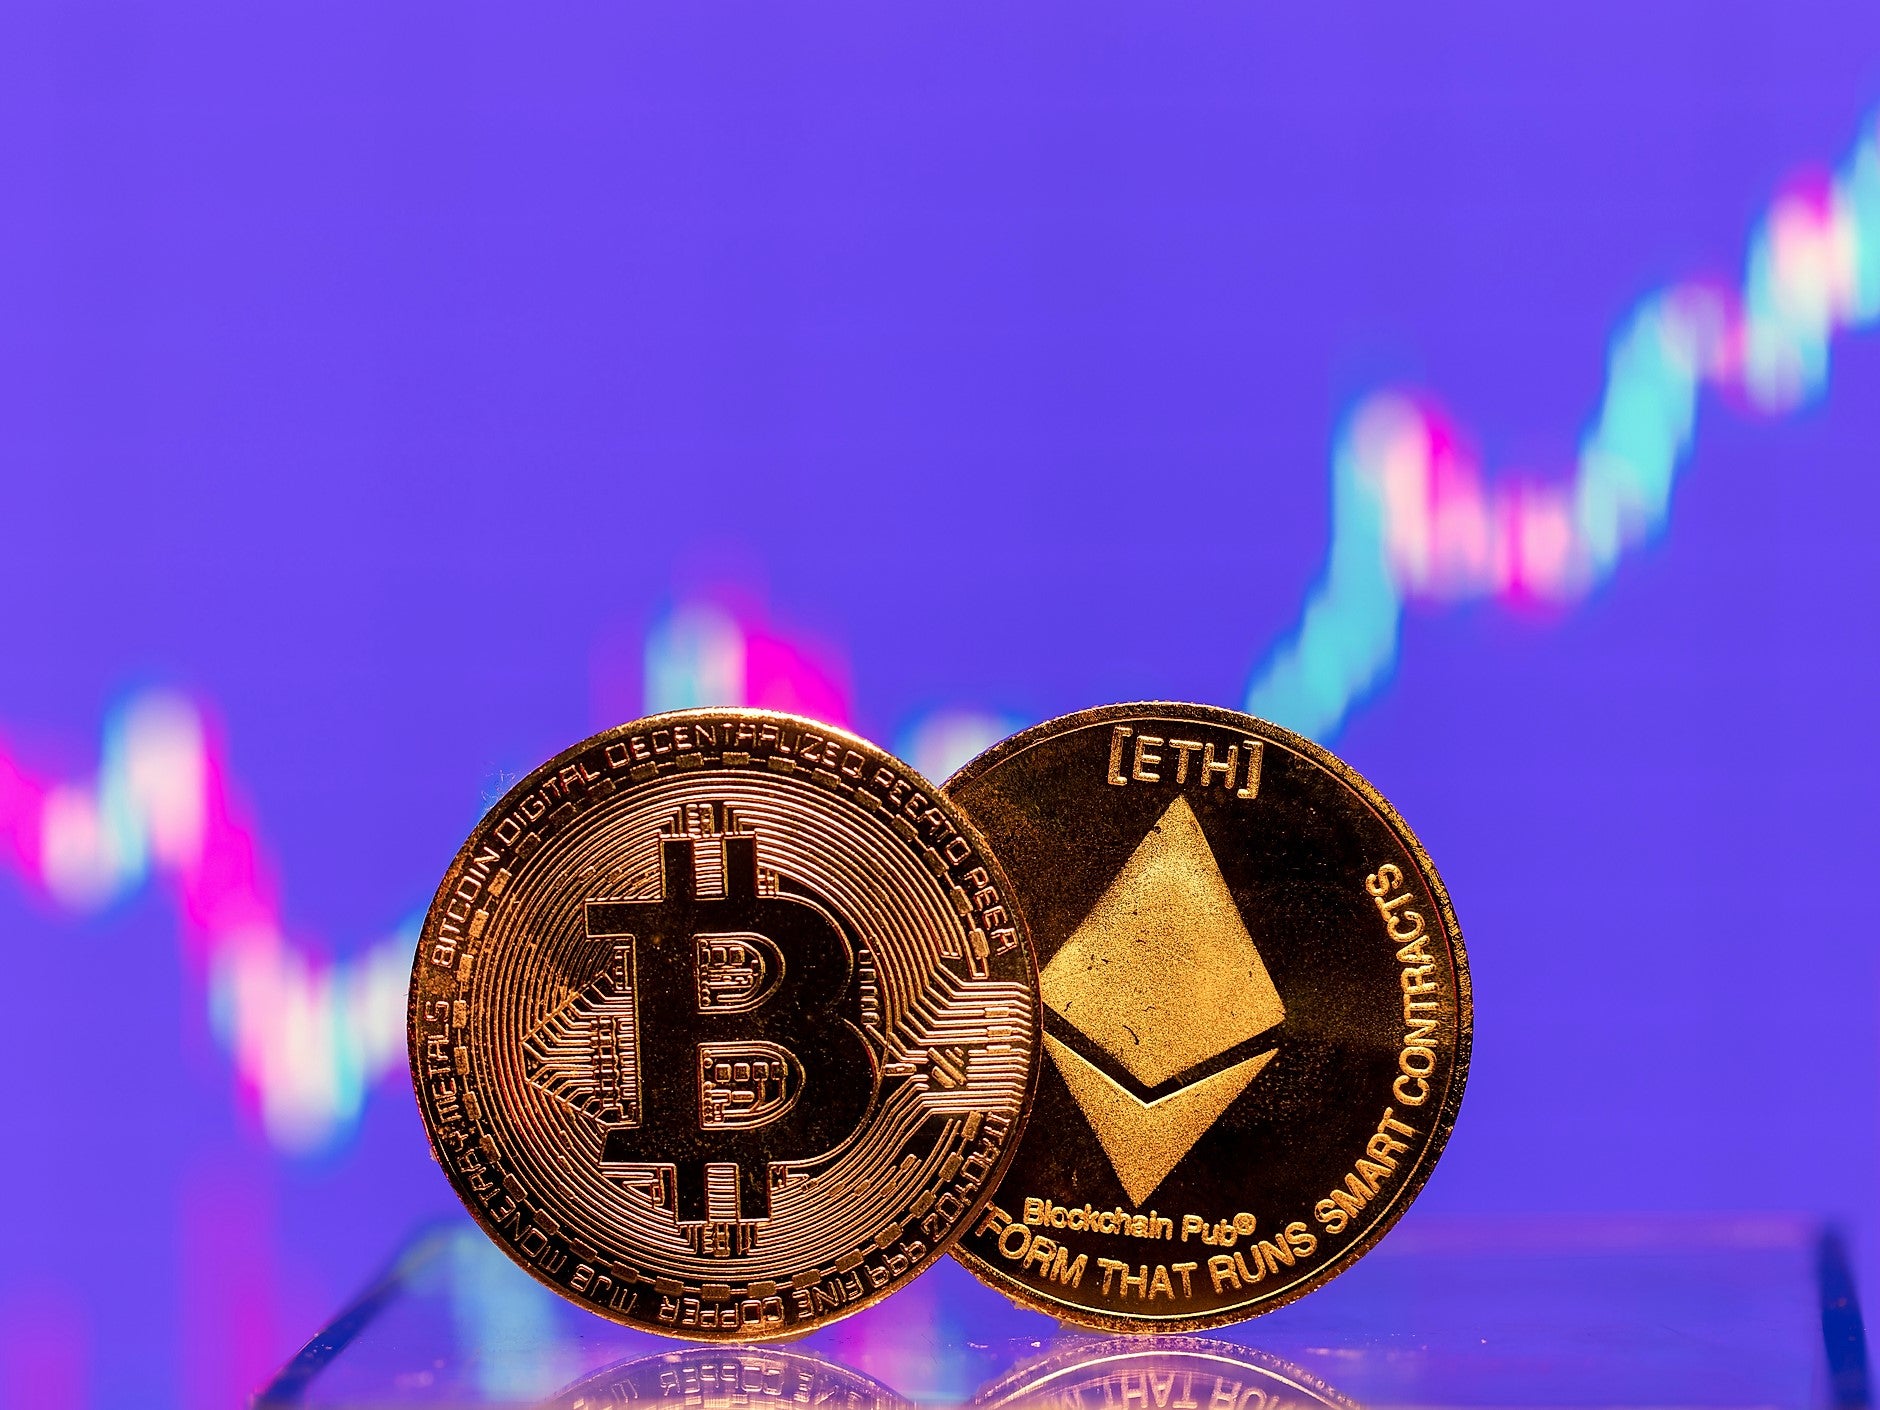 Bitcoin and Ethereum hit record price highs on 9 November, 2021